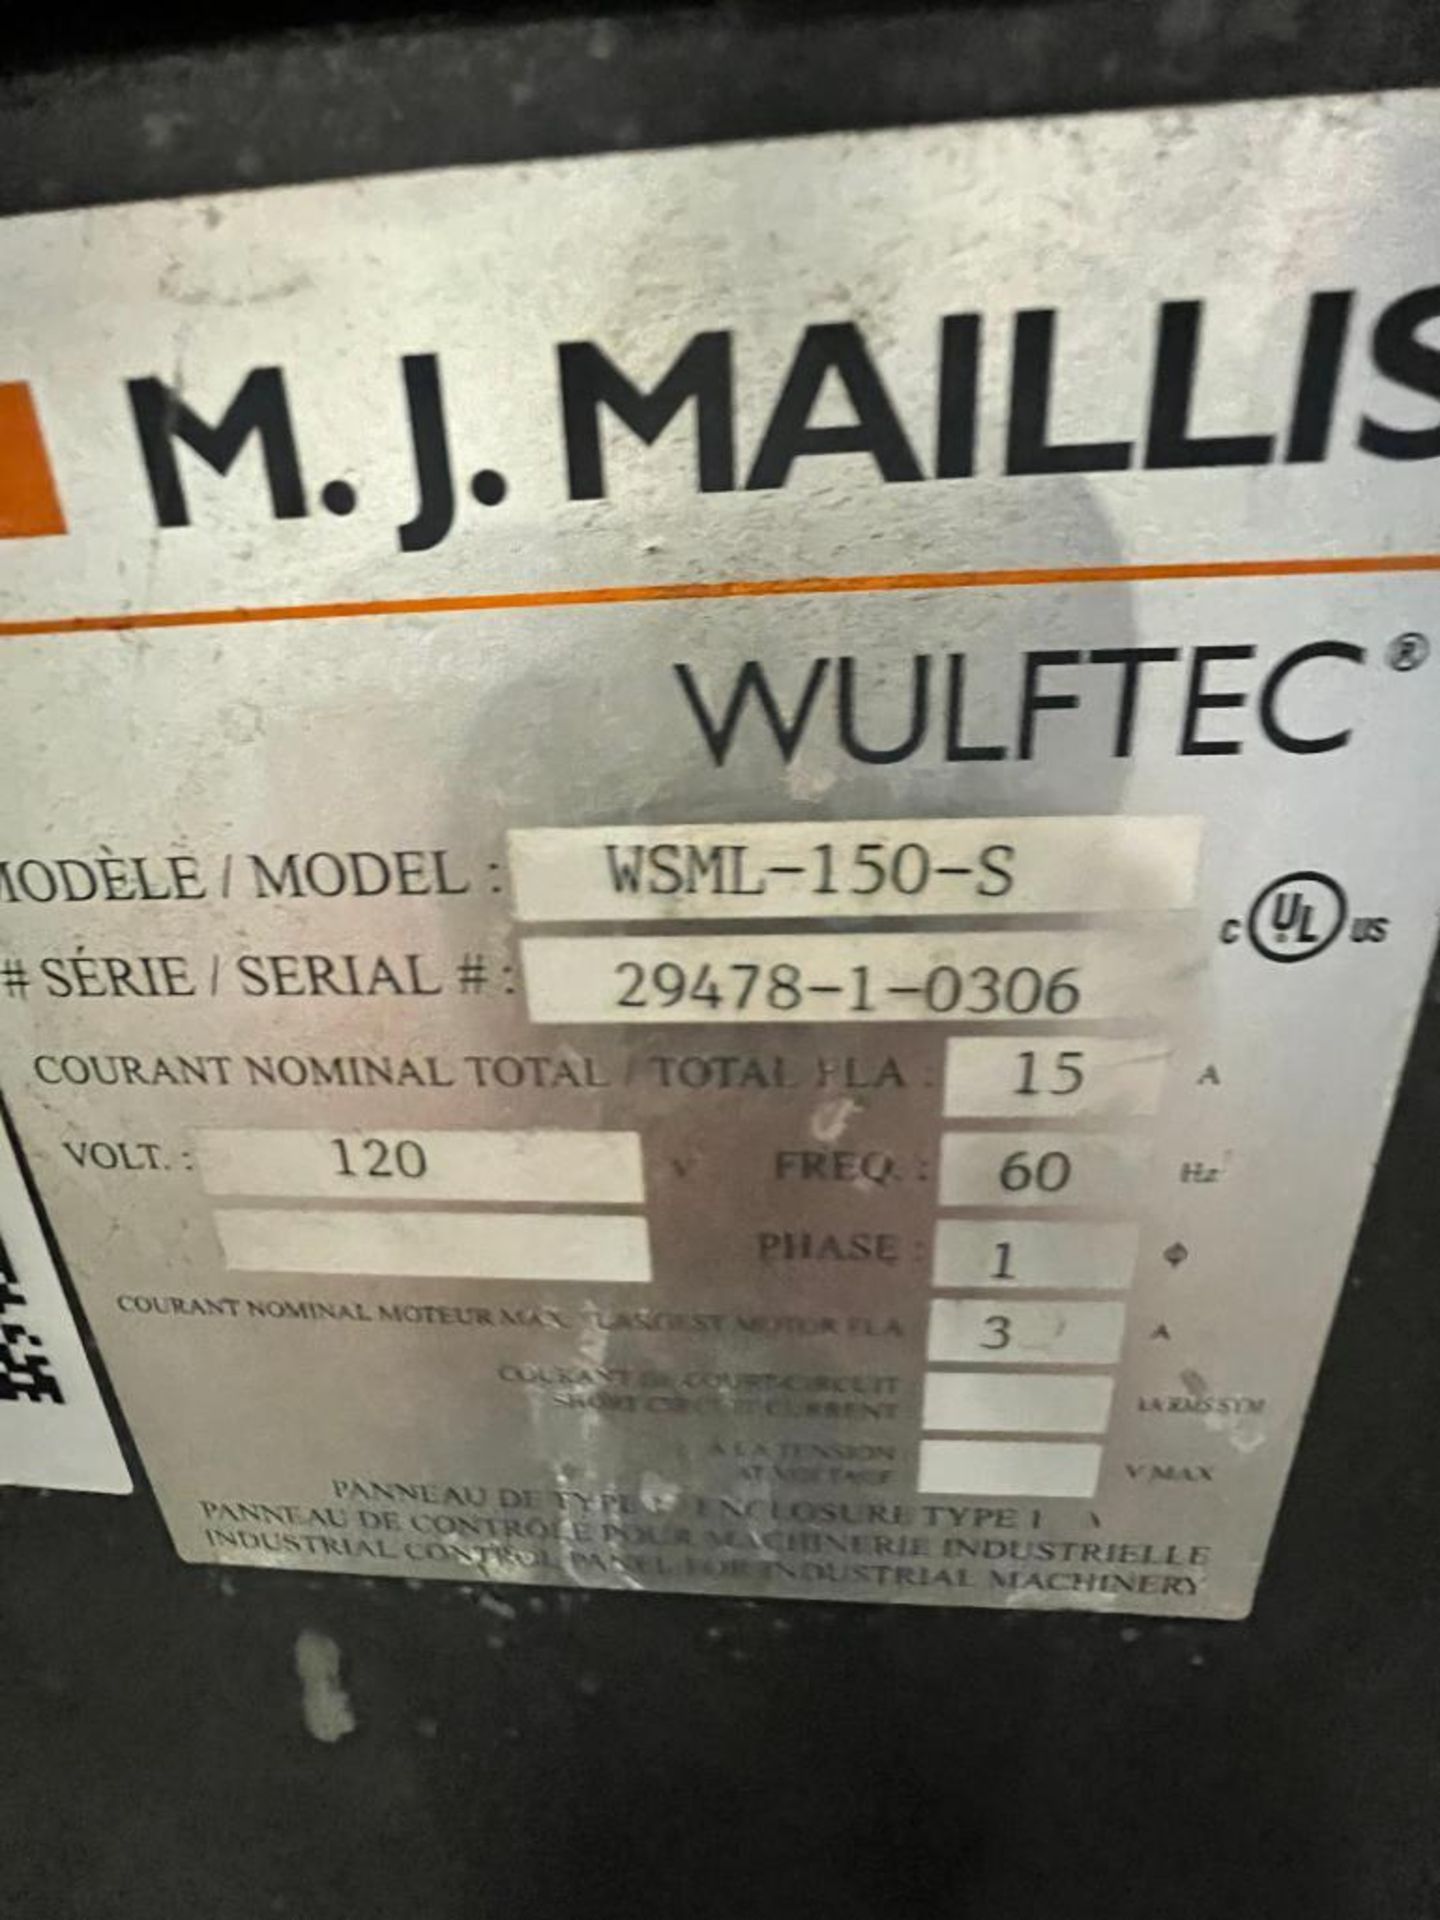 M.J. Maillis Wulftec Stretch Wrapper Machine, Model WSML-150-S, S/N 29478-1-0306, Single Phase ($100 - Image 6 of 6